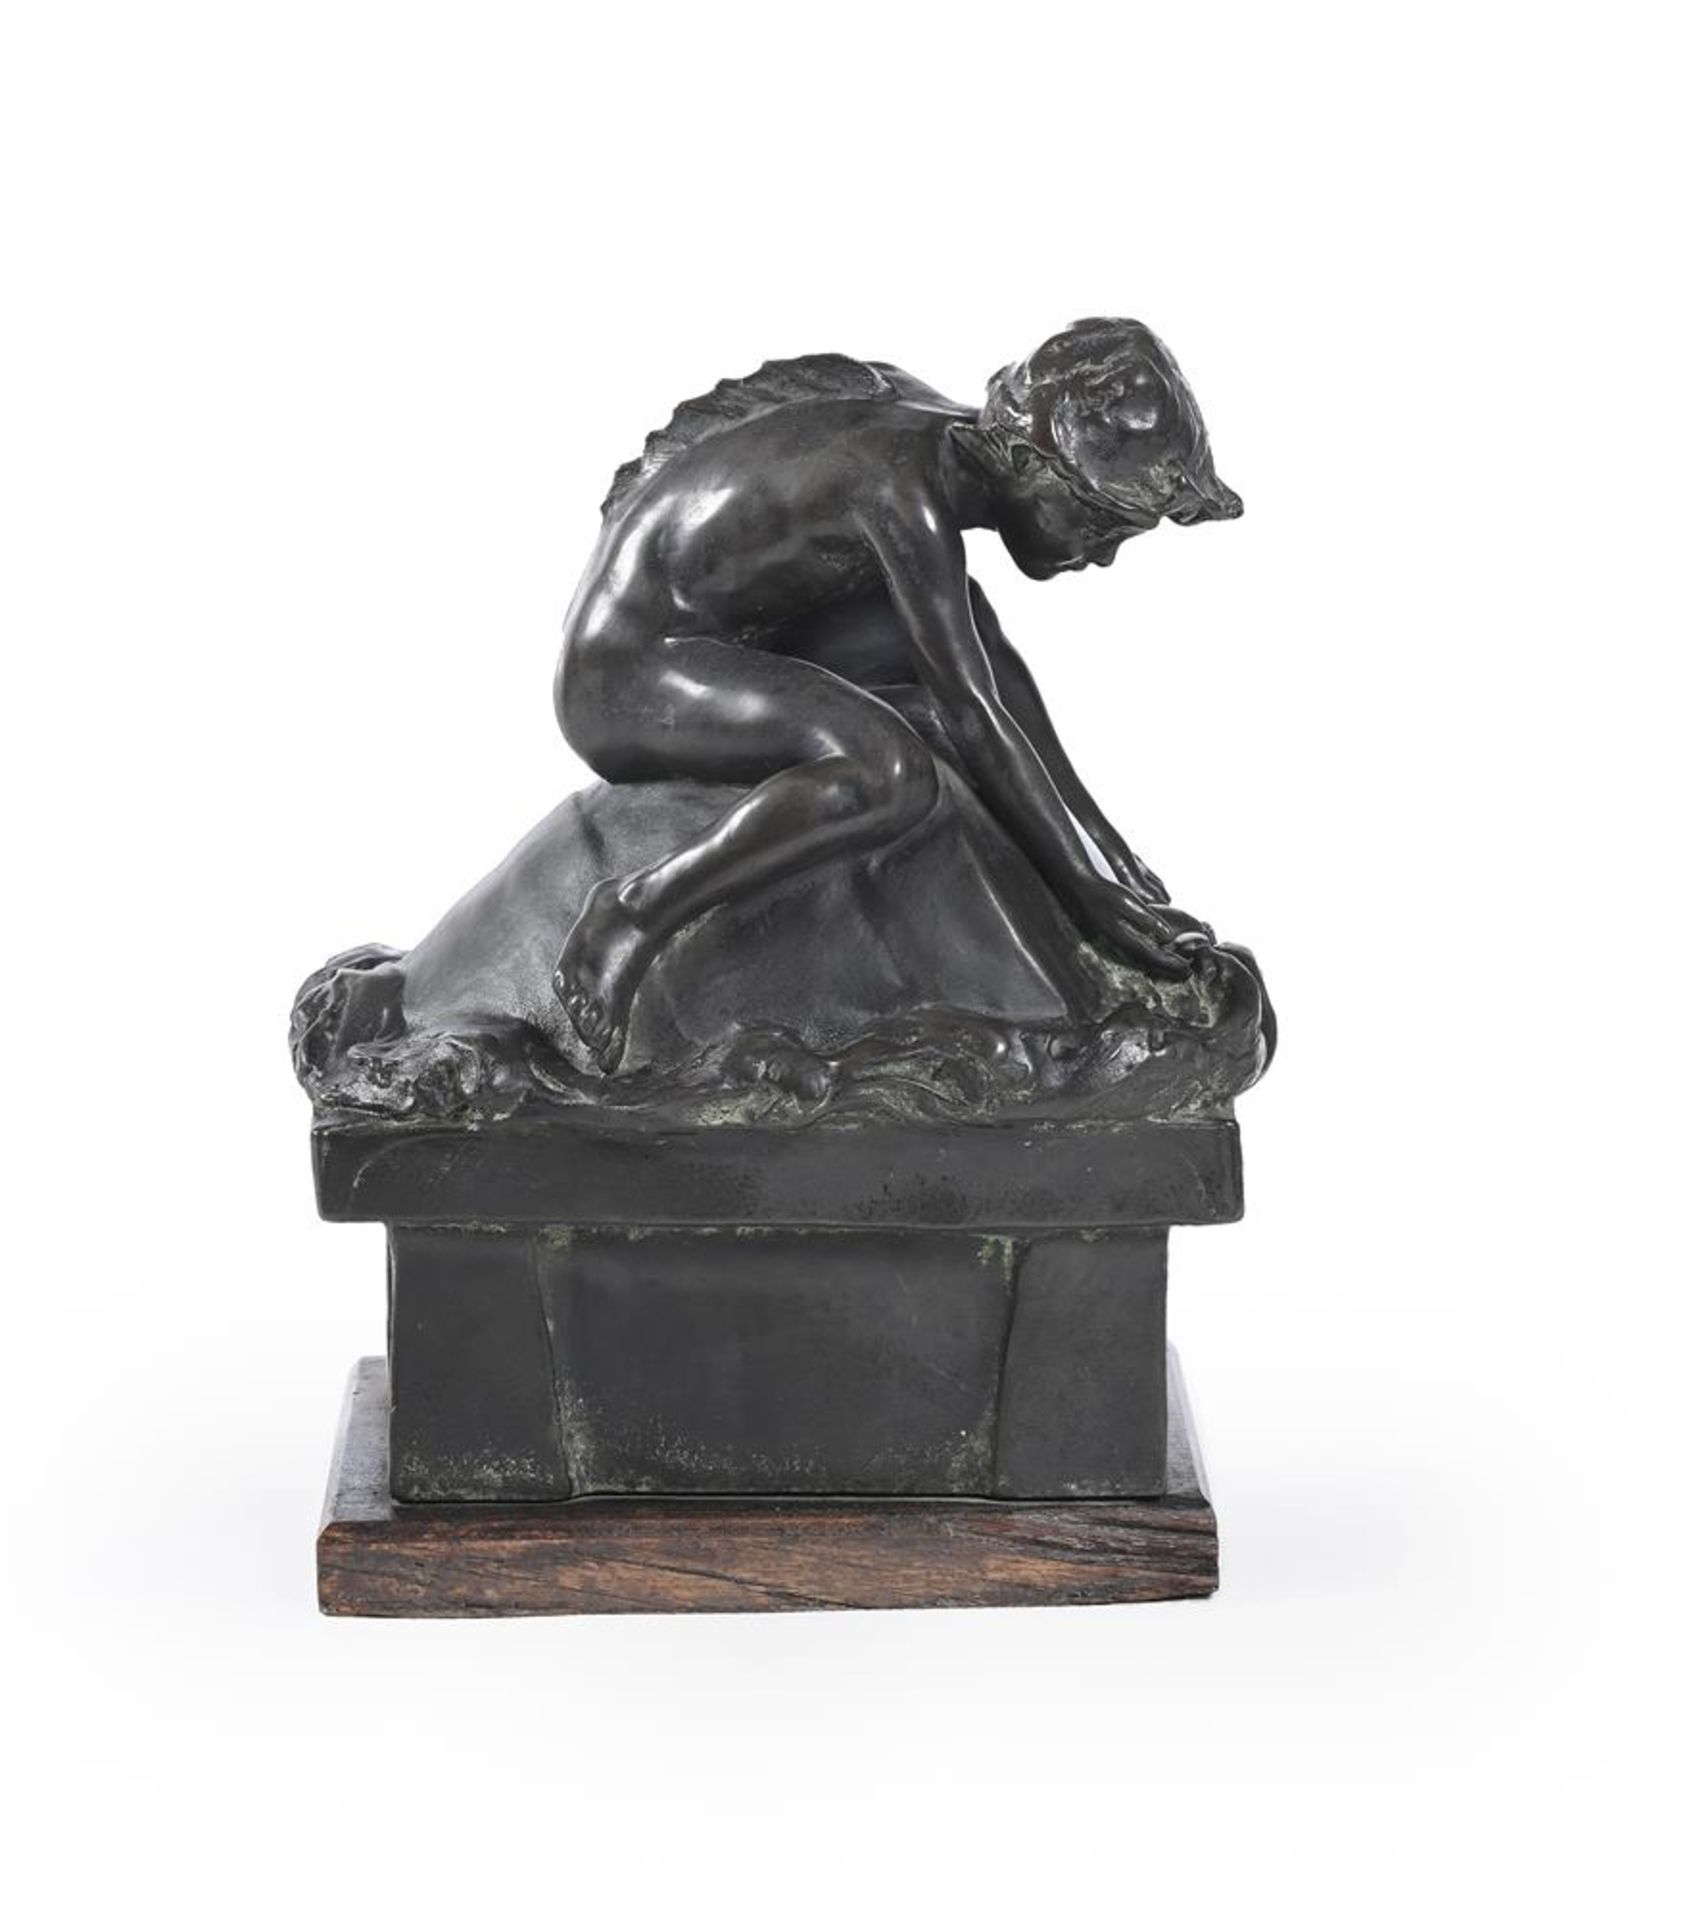 RUBY LEVICK BAILEY (WELSH, 1871-1940), A BRONZE GROUP OF A MERCHILD ON A FLOATING BARREL, DATED 1912